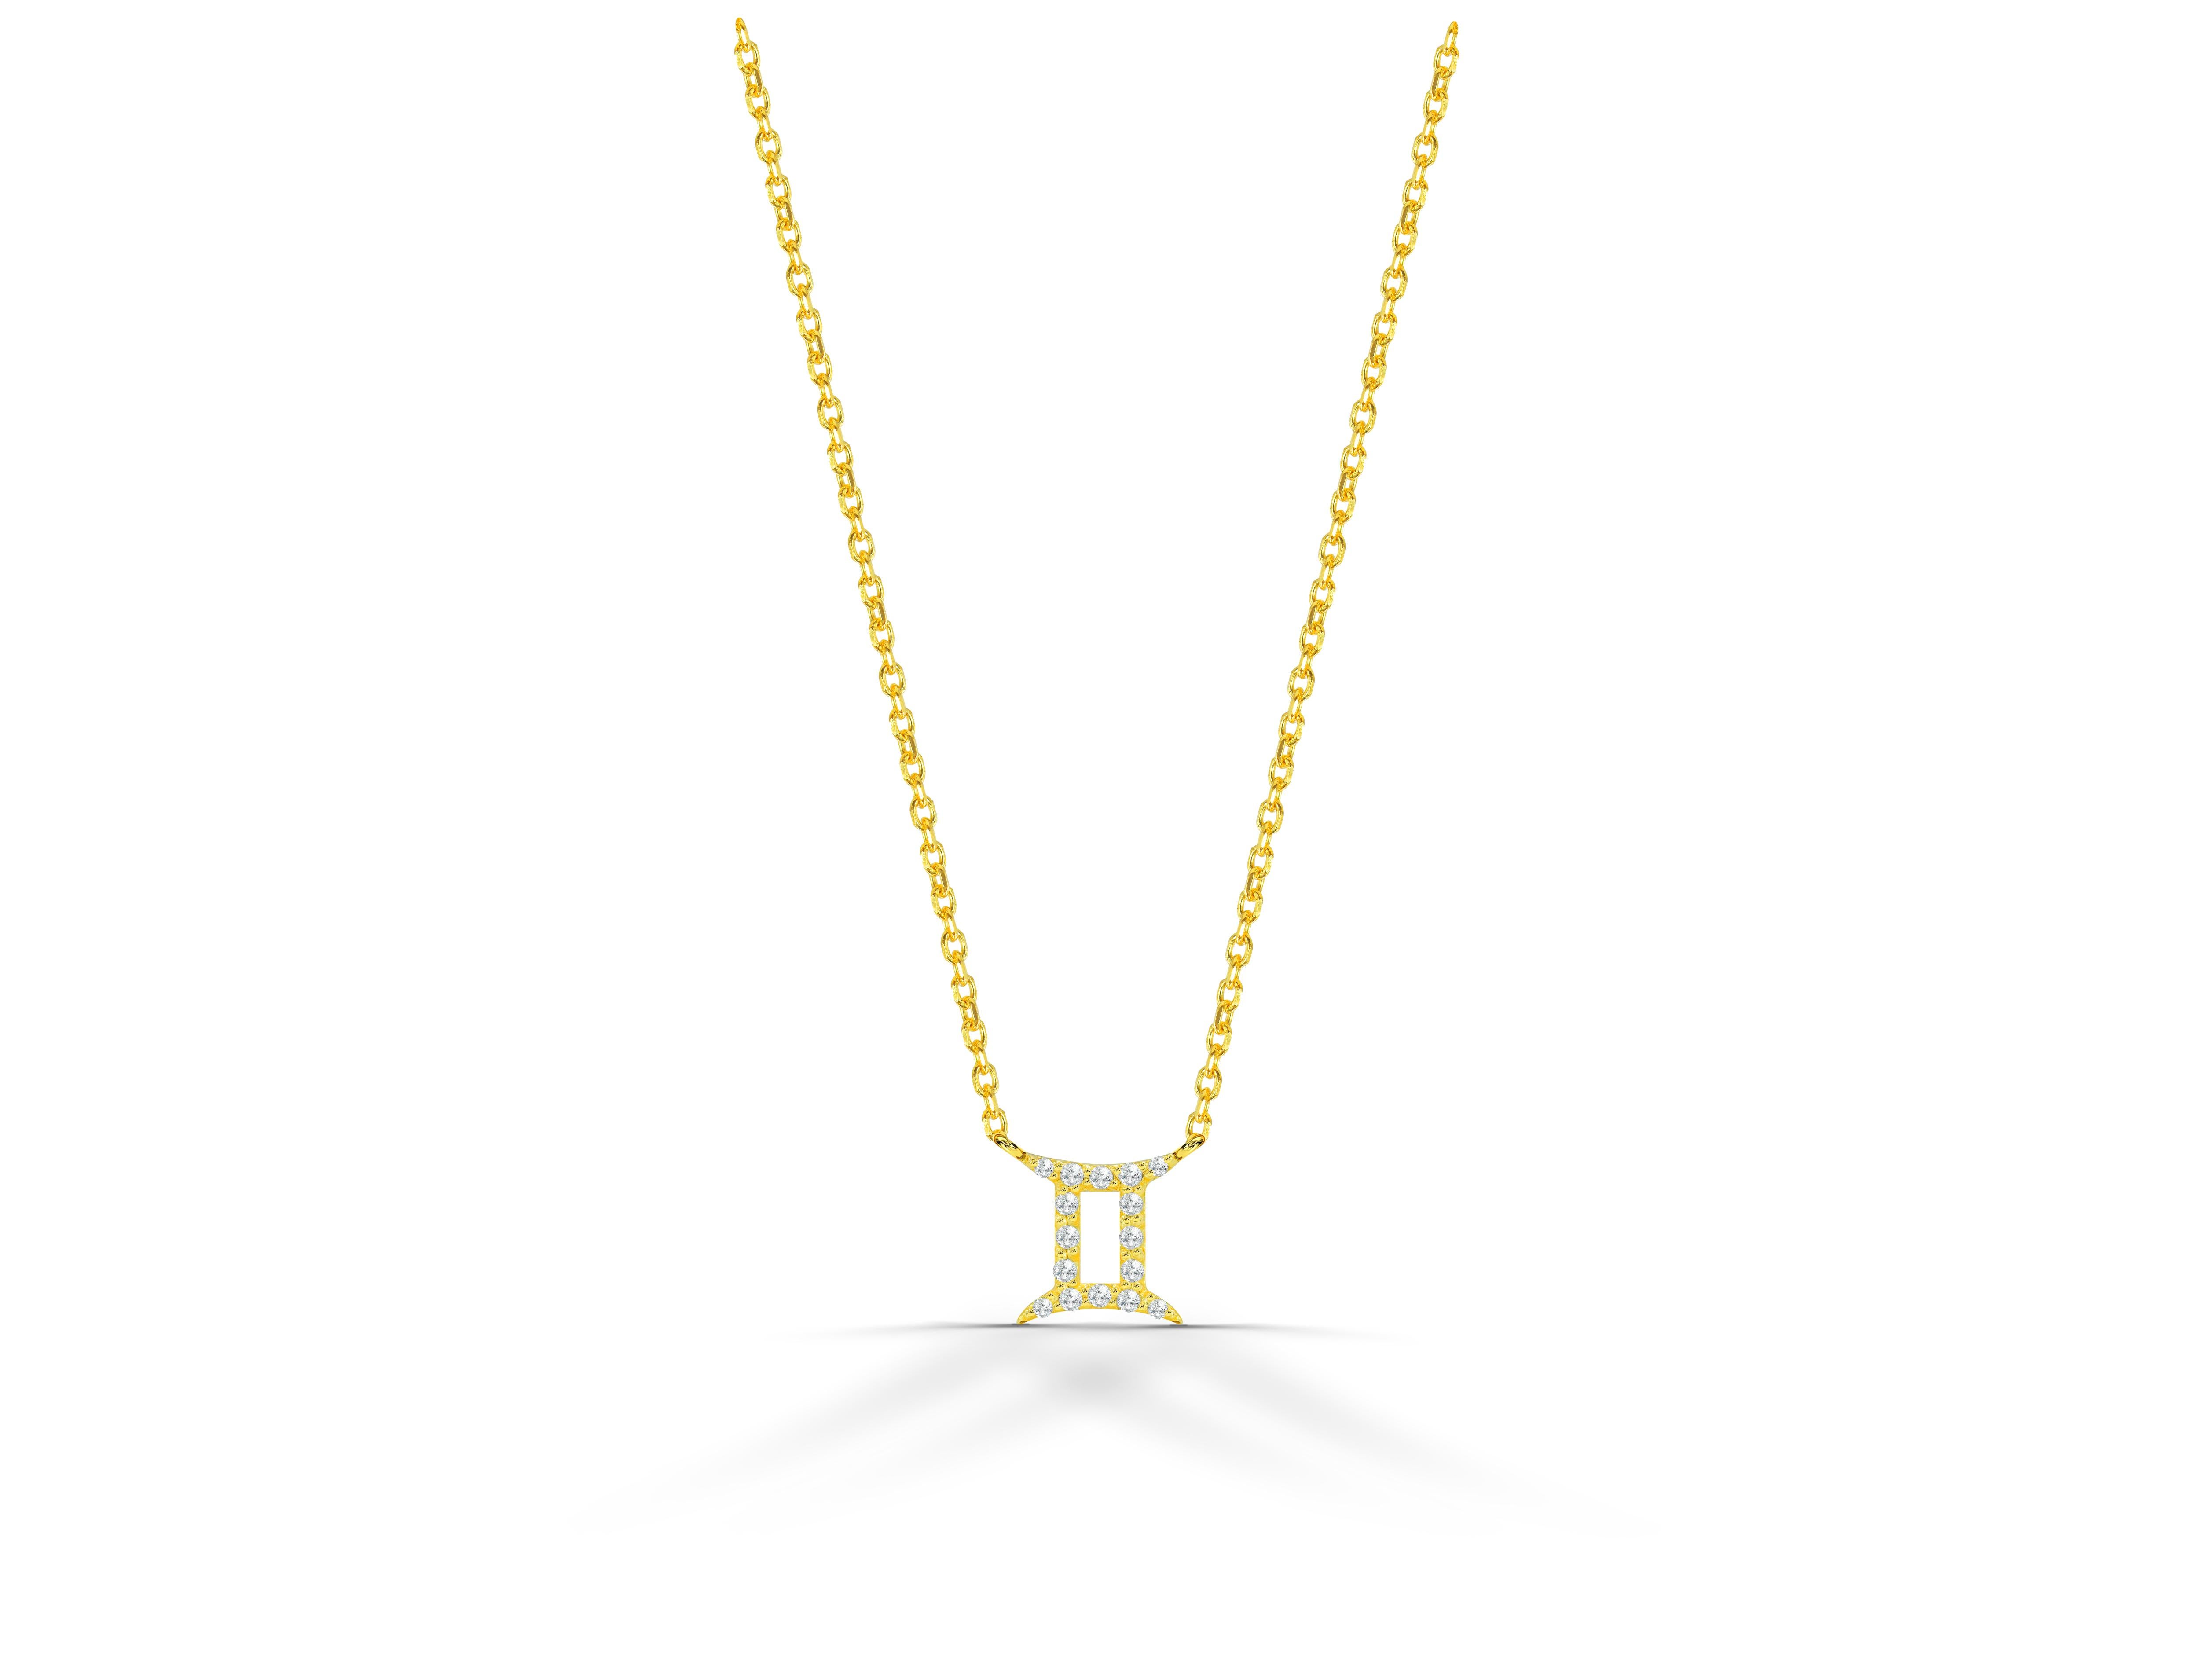 Beautiful and Sparkly Diamond Gemini Necklace is made of 14k solid gold.
Available in three colors of gold:  Rose Gold / White Gold / Yellow Gold.

Natural genuine round cut diamond each diamond is hand selected by me to ensure quality and set by a